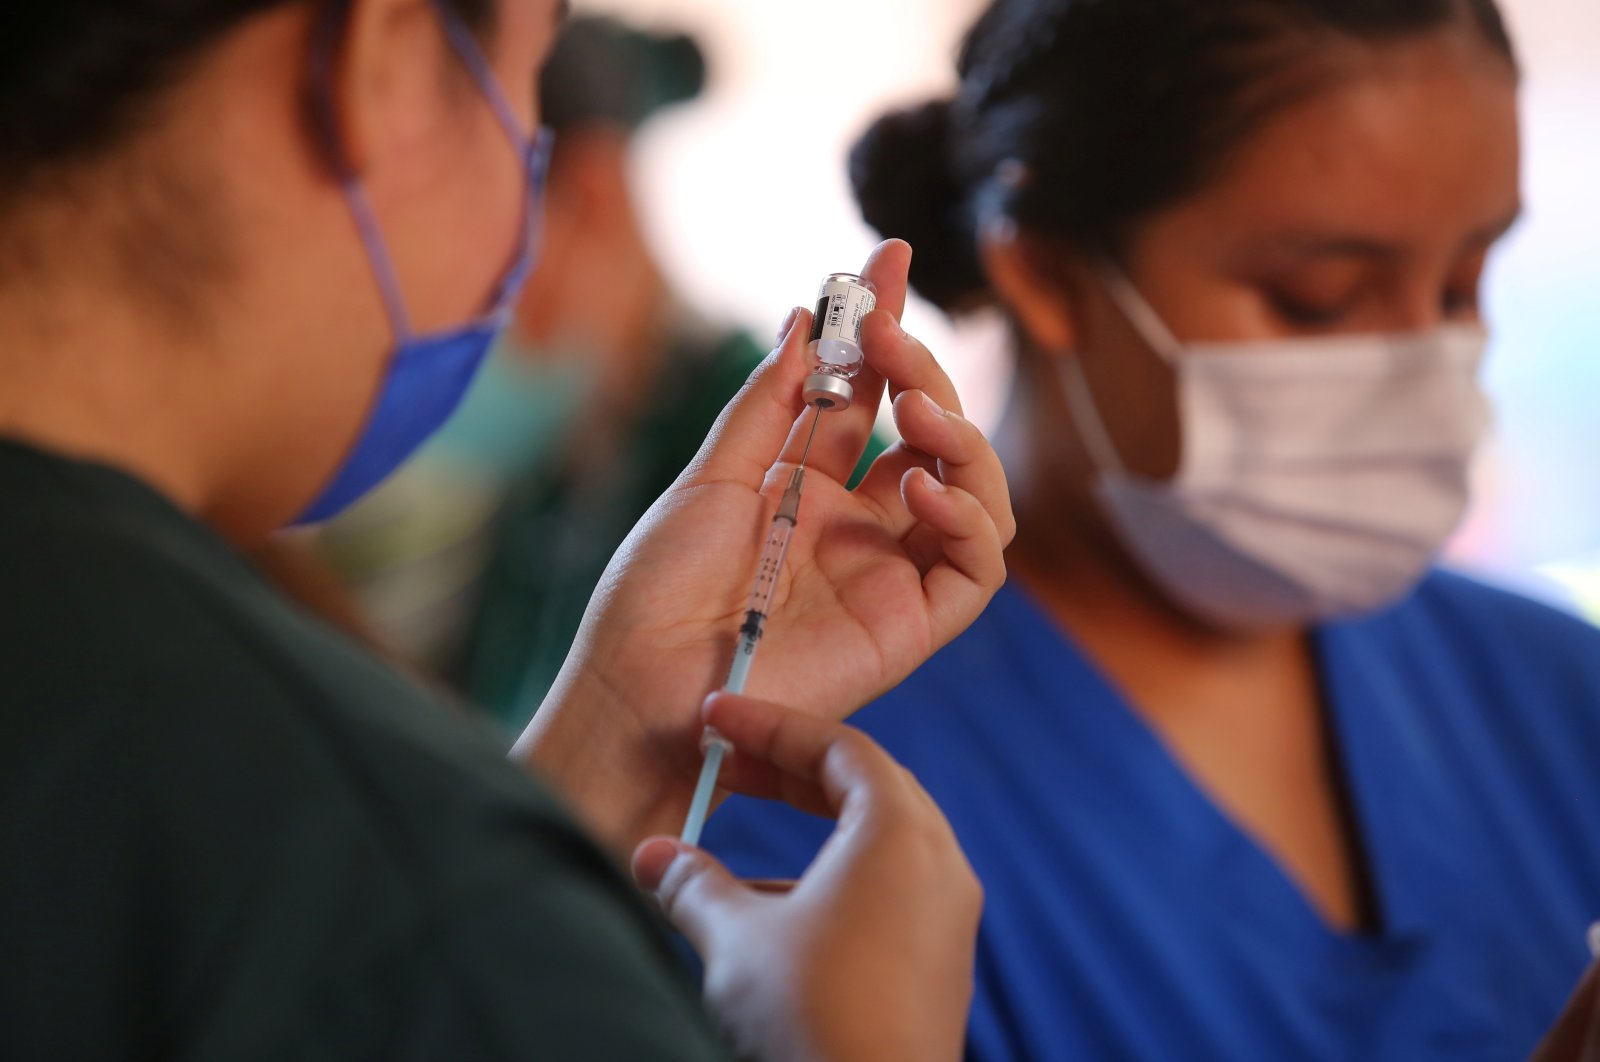 Health care workers prepare Johnson & Johnson vaccines against COVID-19, as part of a government plan to inoculate Mexican border residents on its shared frontier with the United States, in Tijuana, Mexico, June 17, 2021. (Reuters Photo)